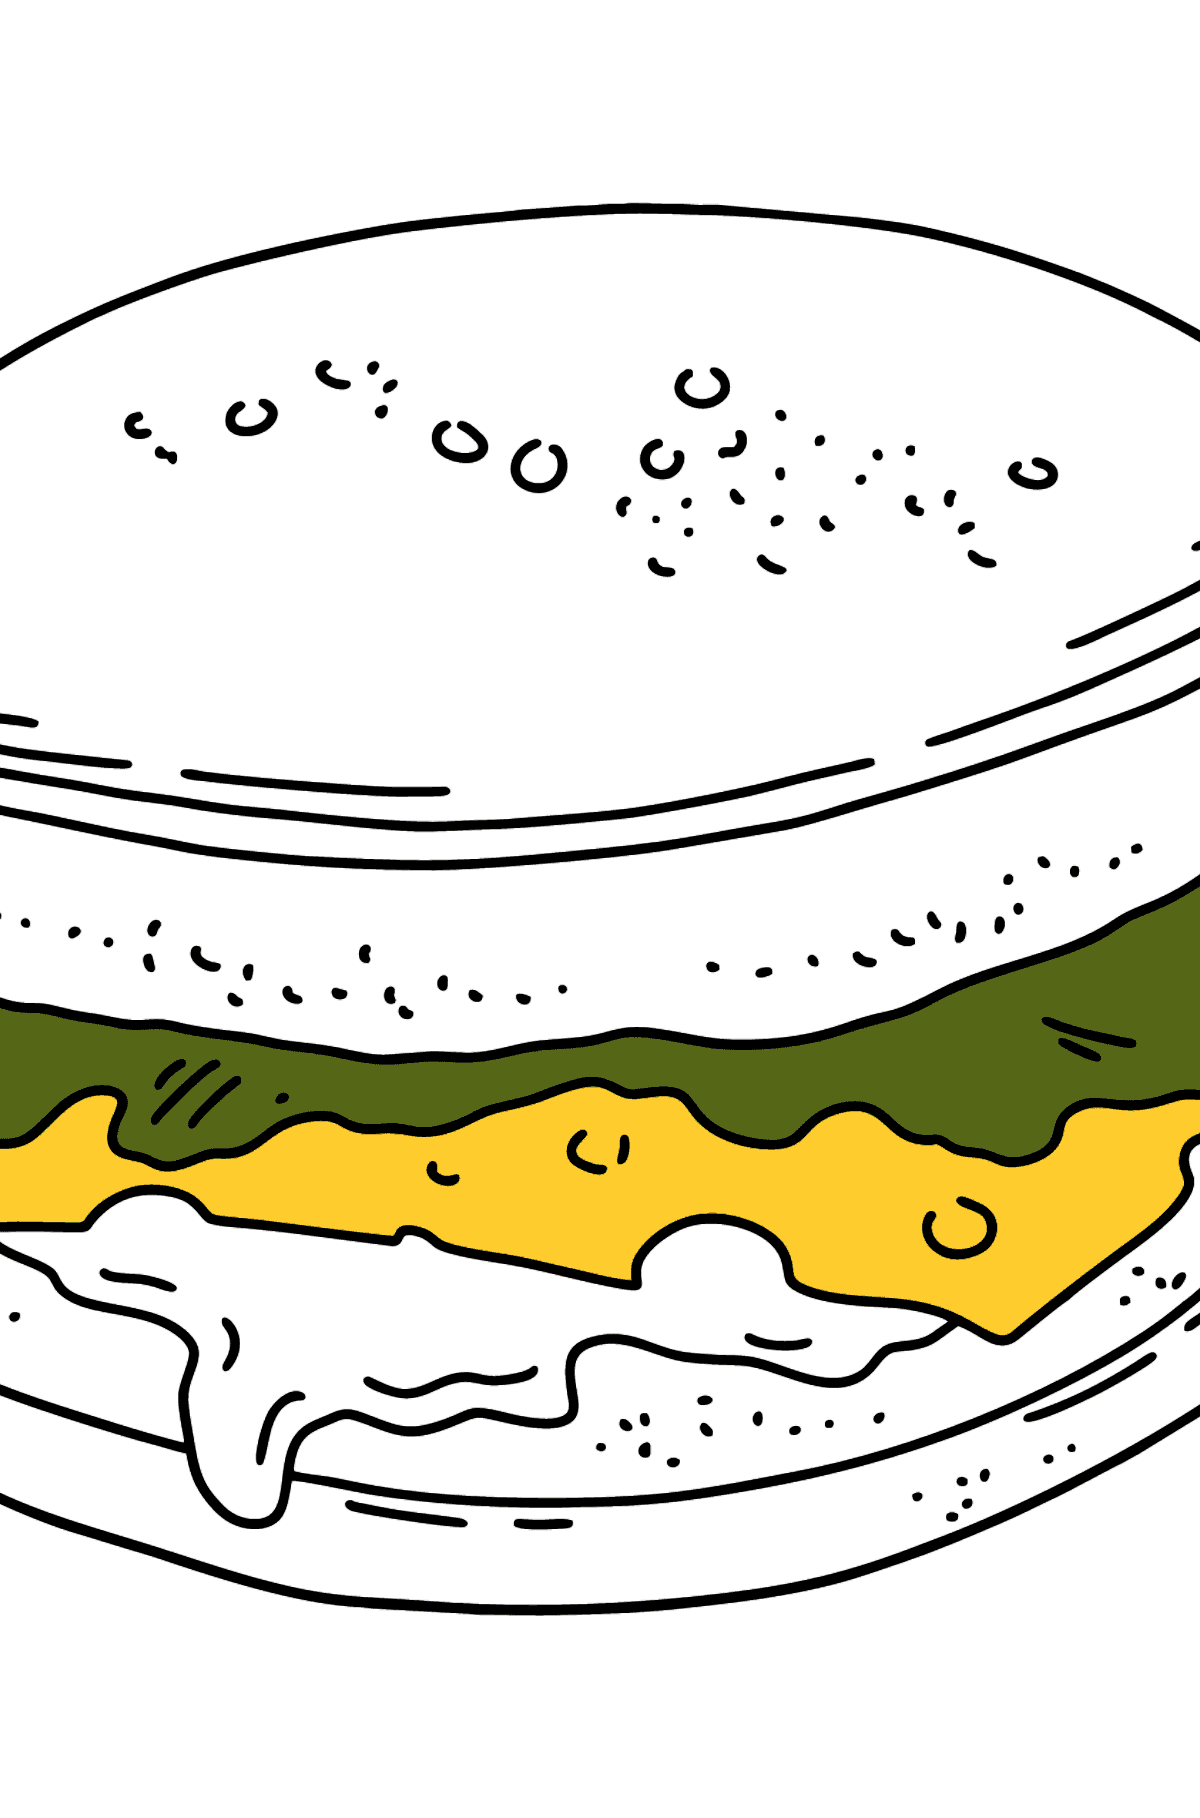 Hamburger coloring page - Coloring Pages for Kids